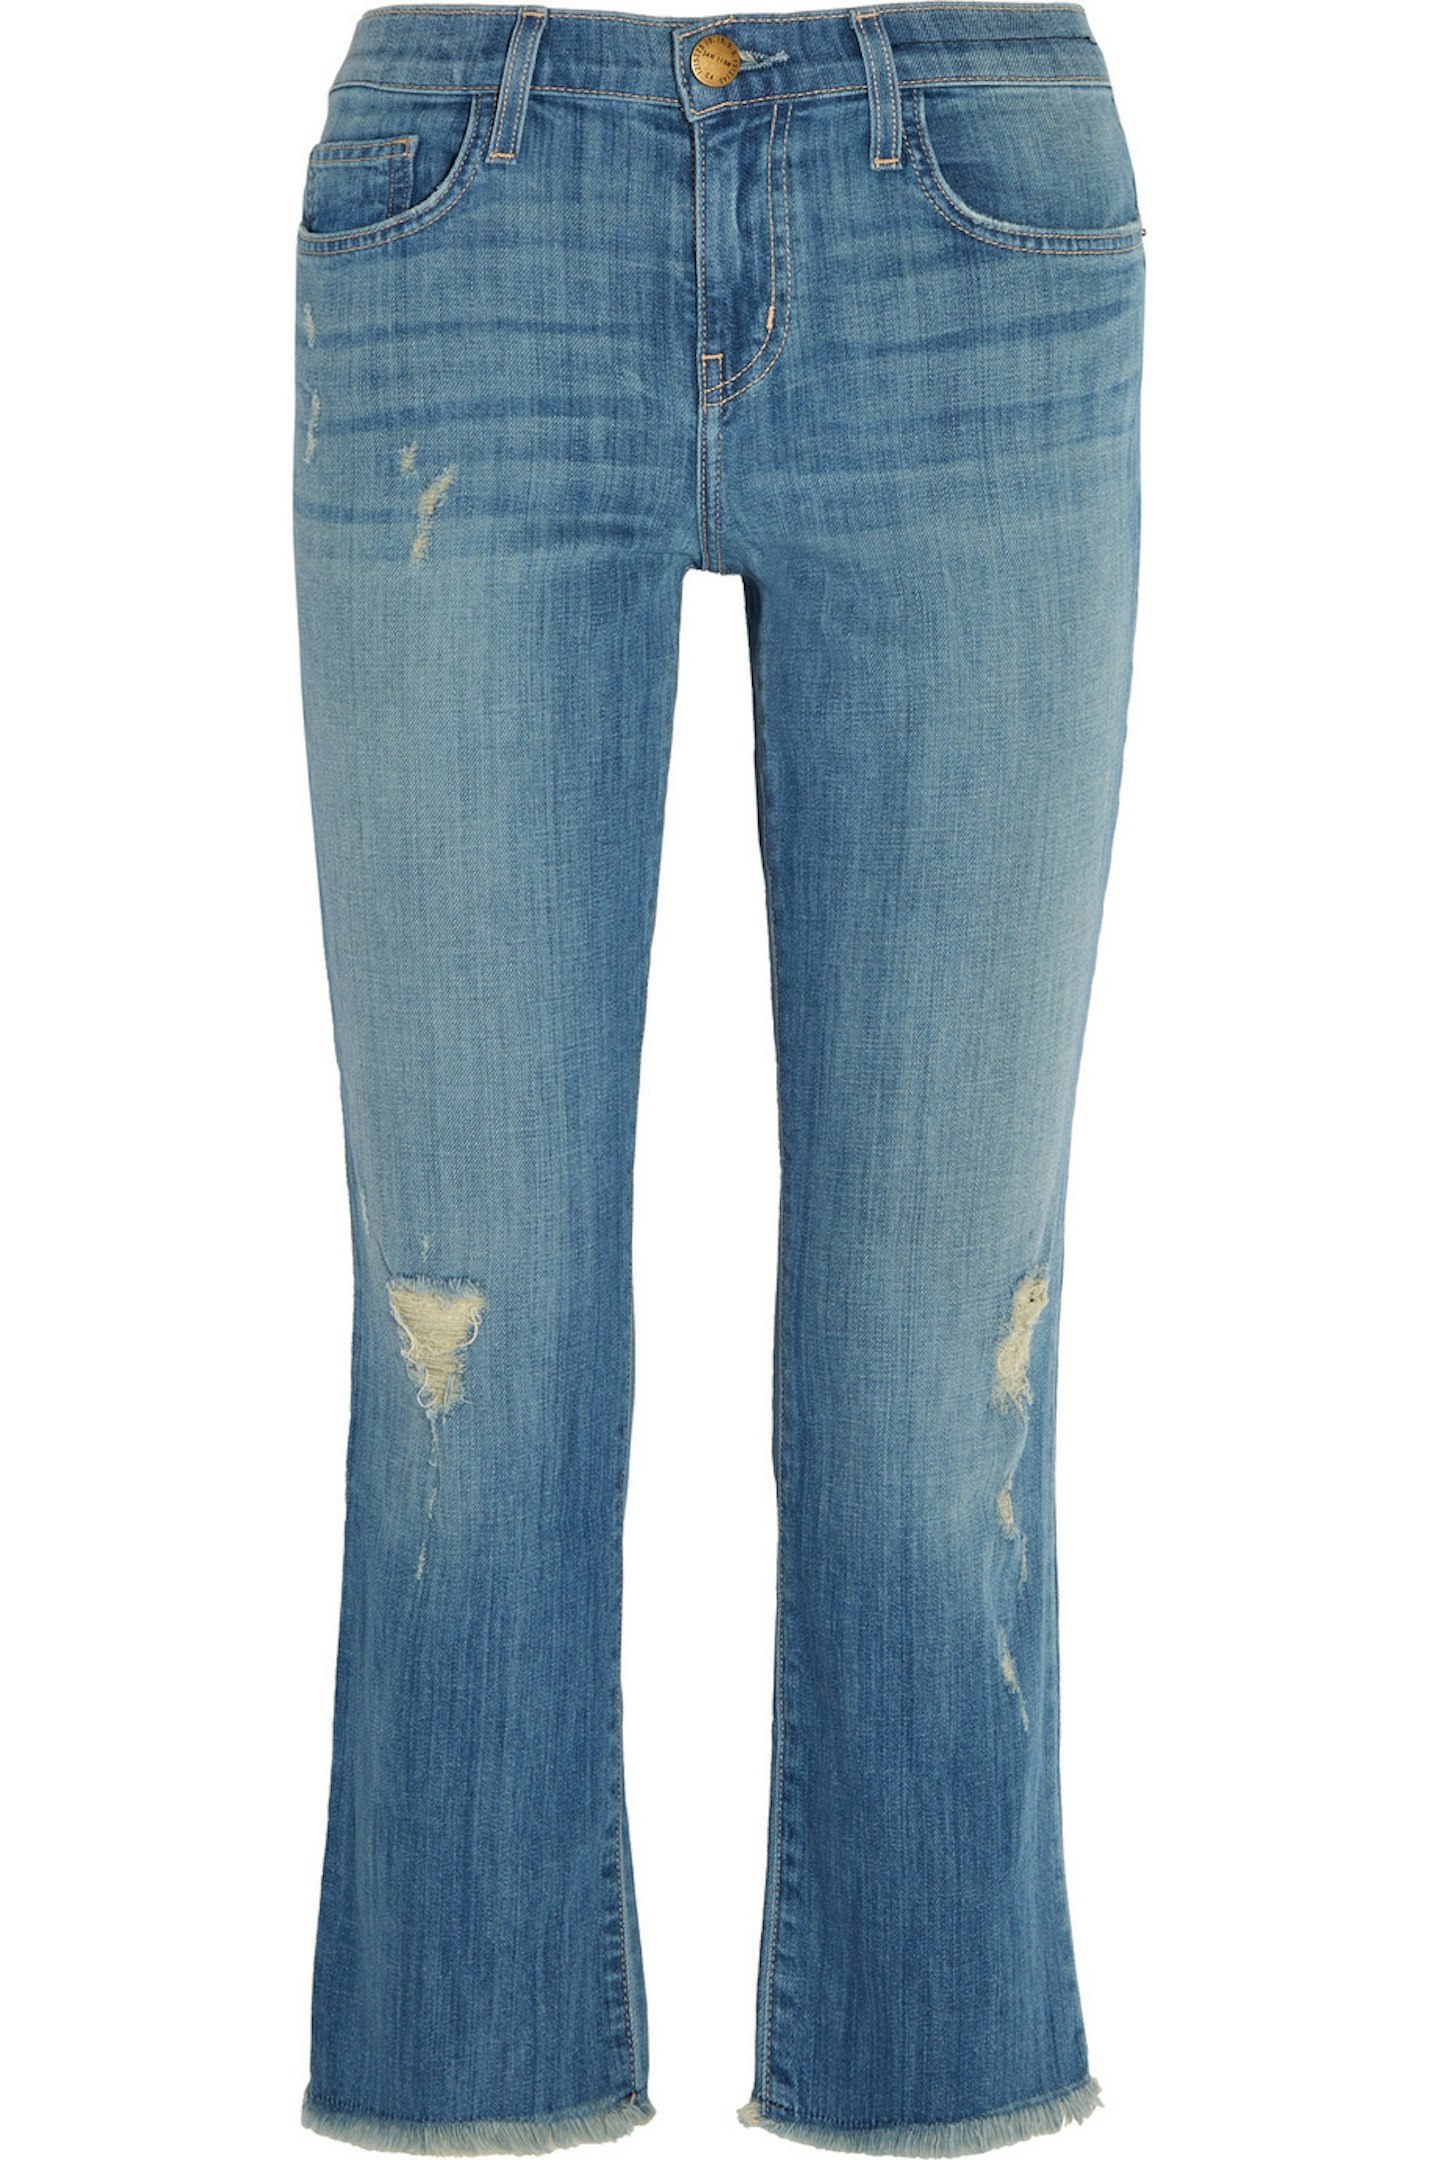 Cropped distressed jeans current elliot